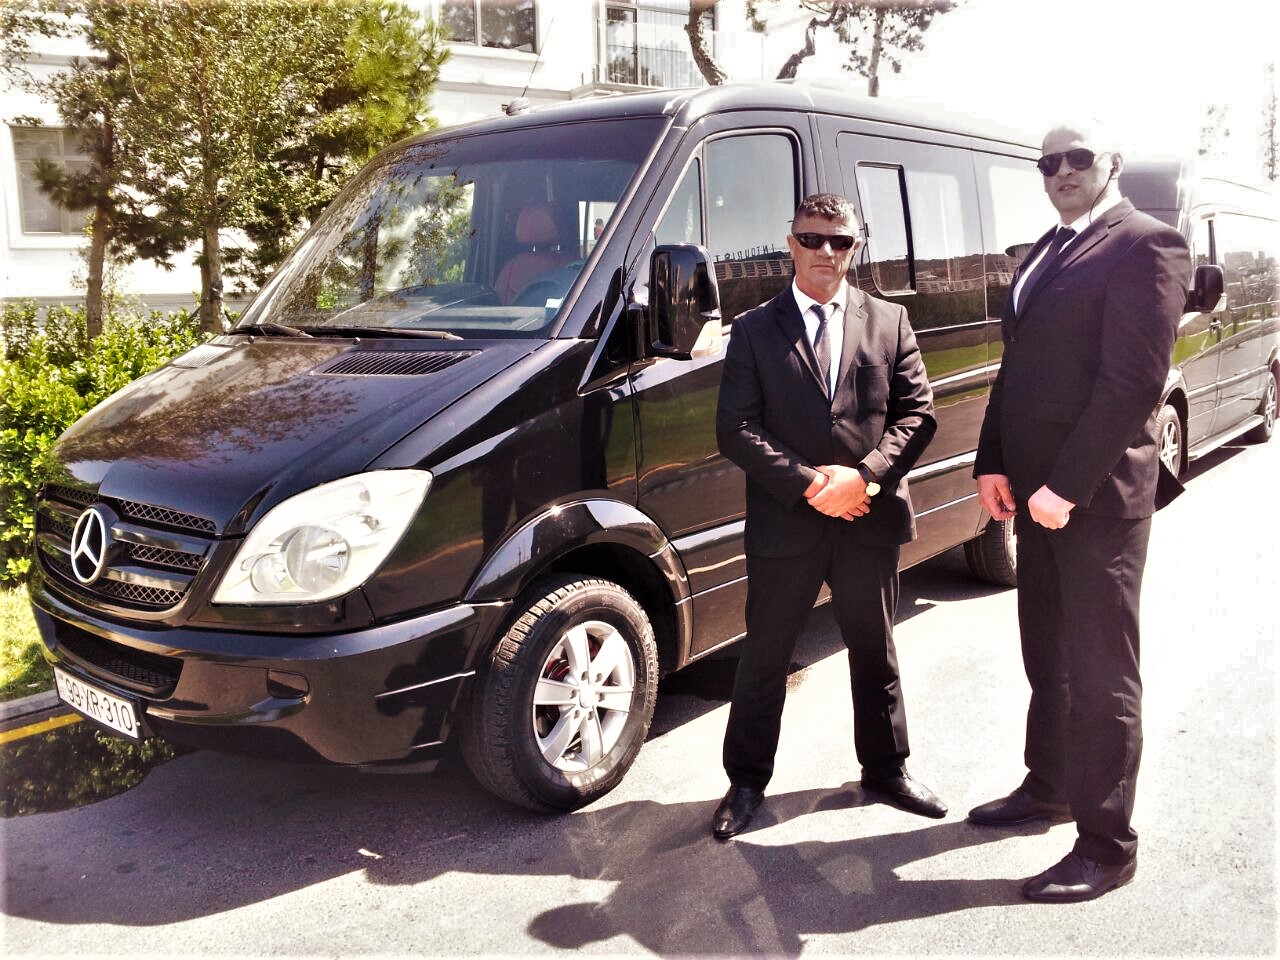 Sirgroup the best security company in Azerbaijan